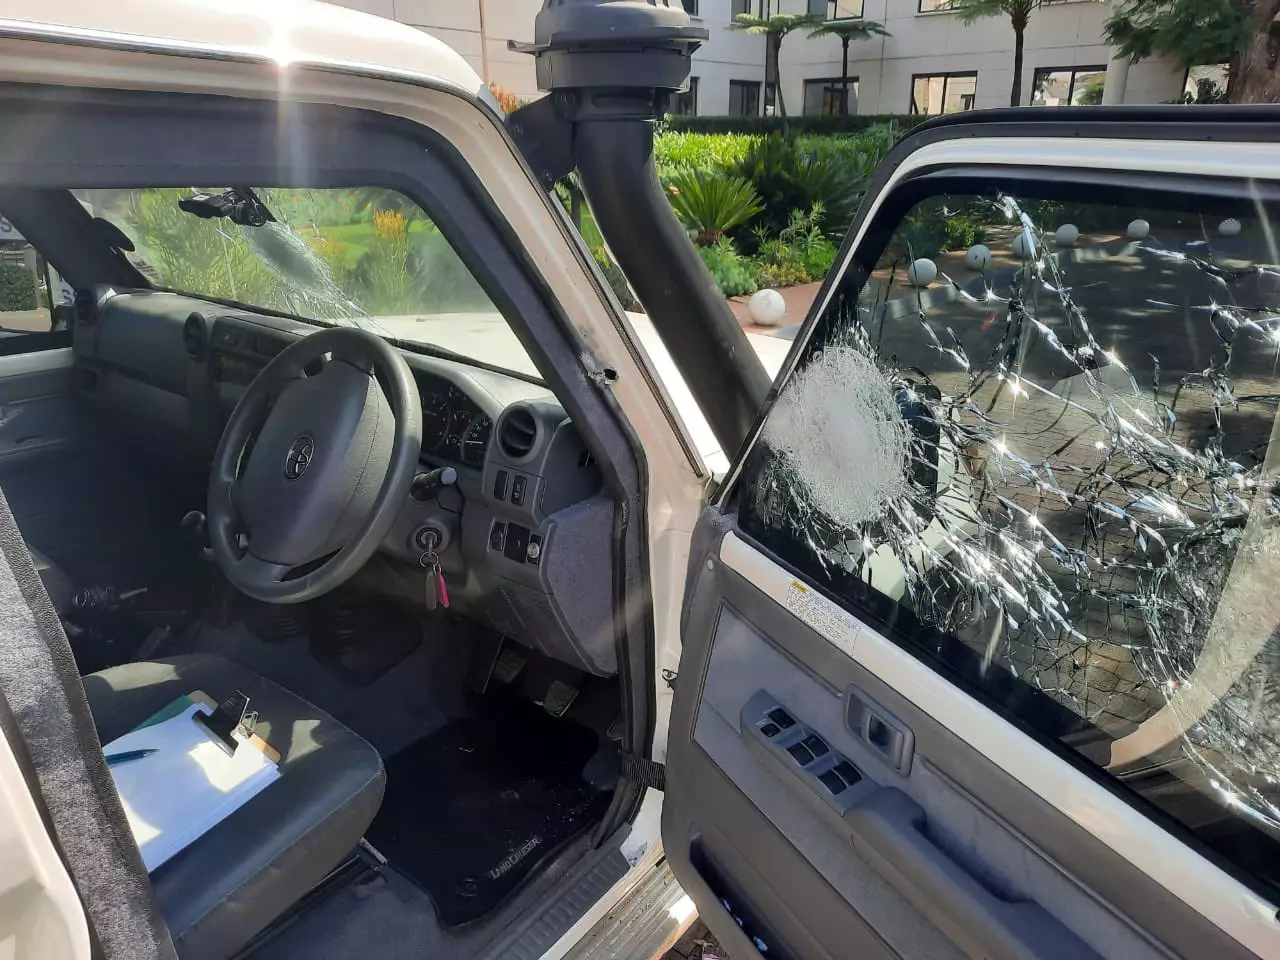 The car's window shattered by bullets.